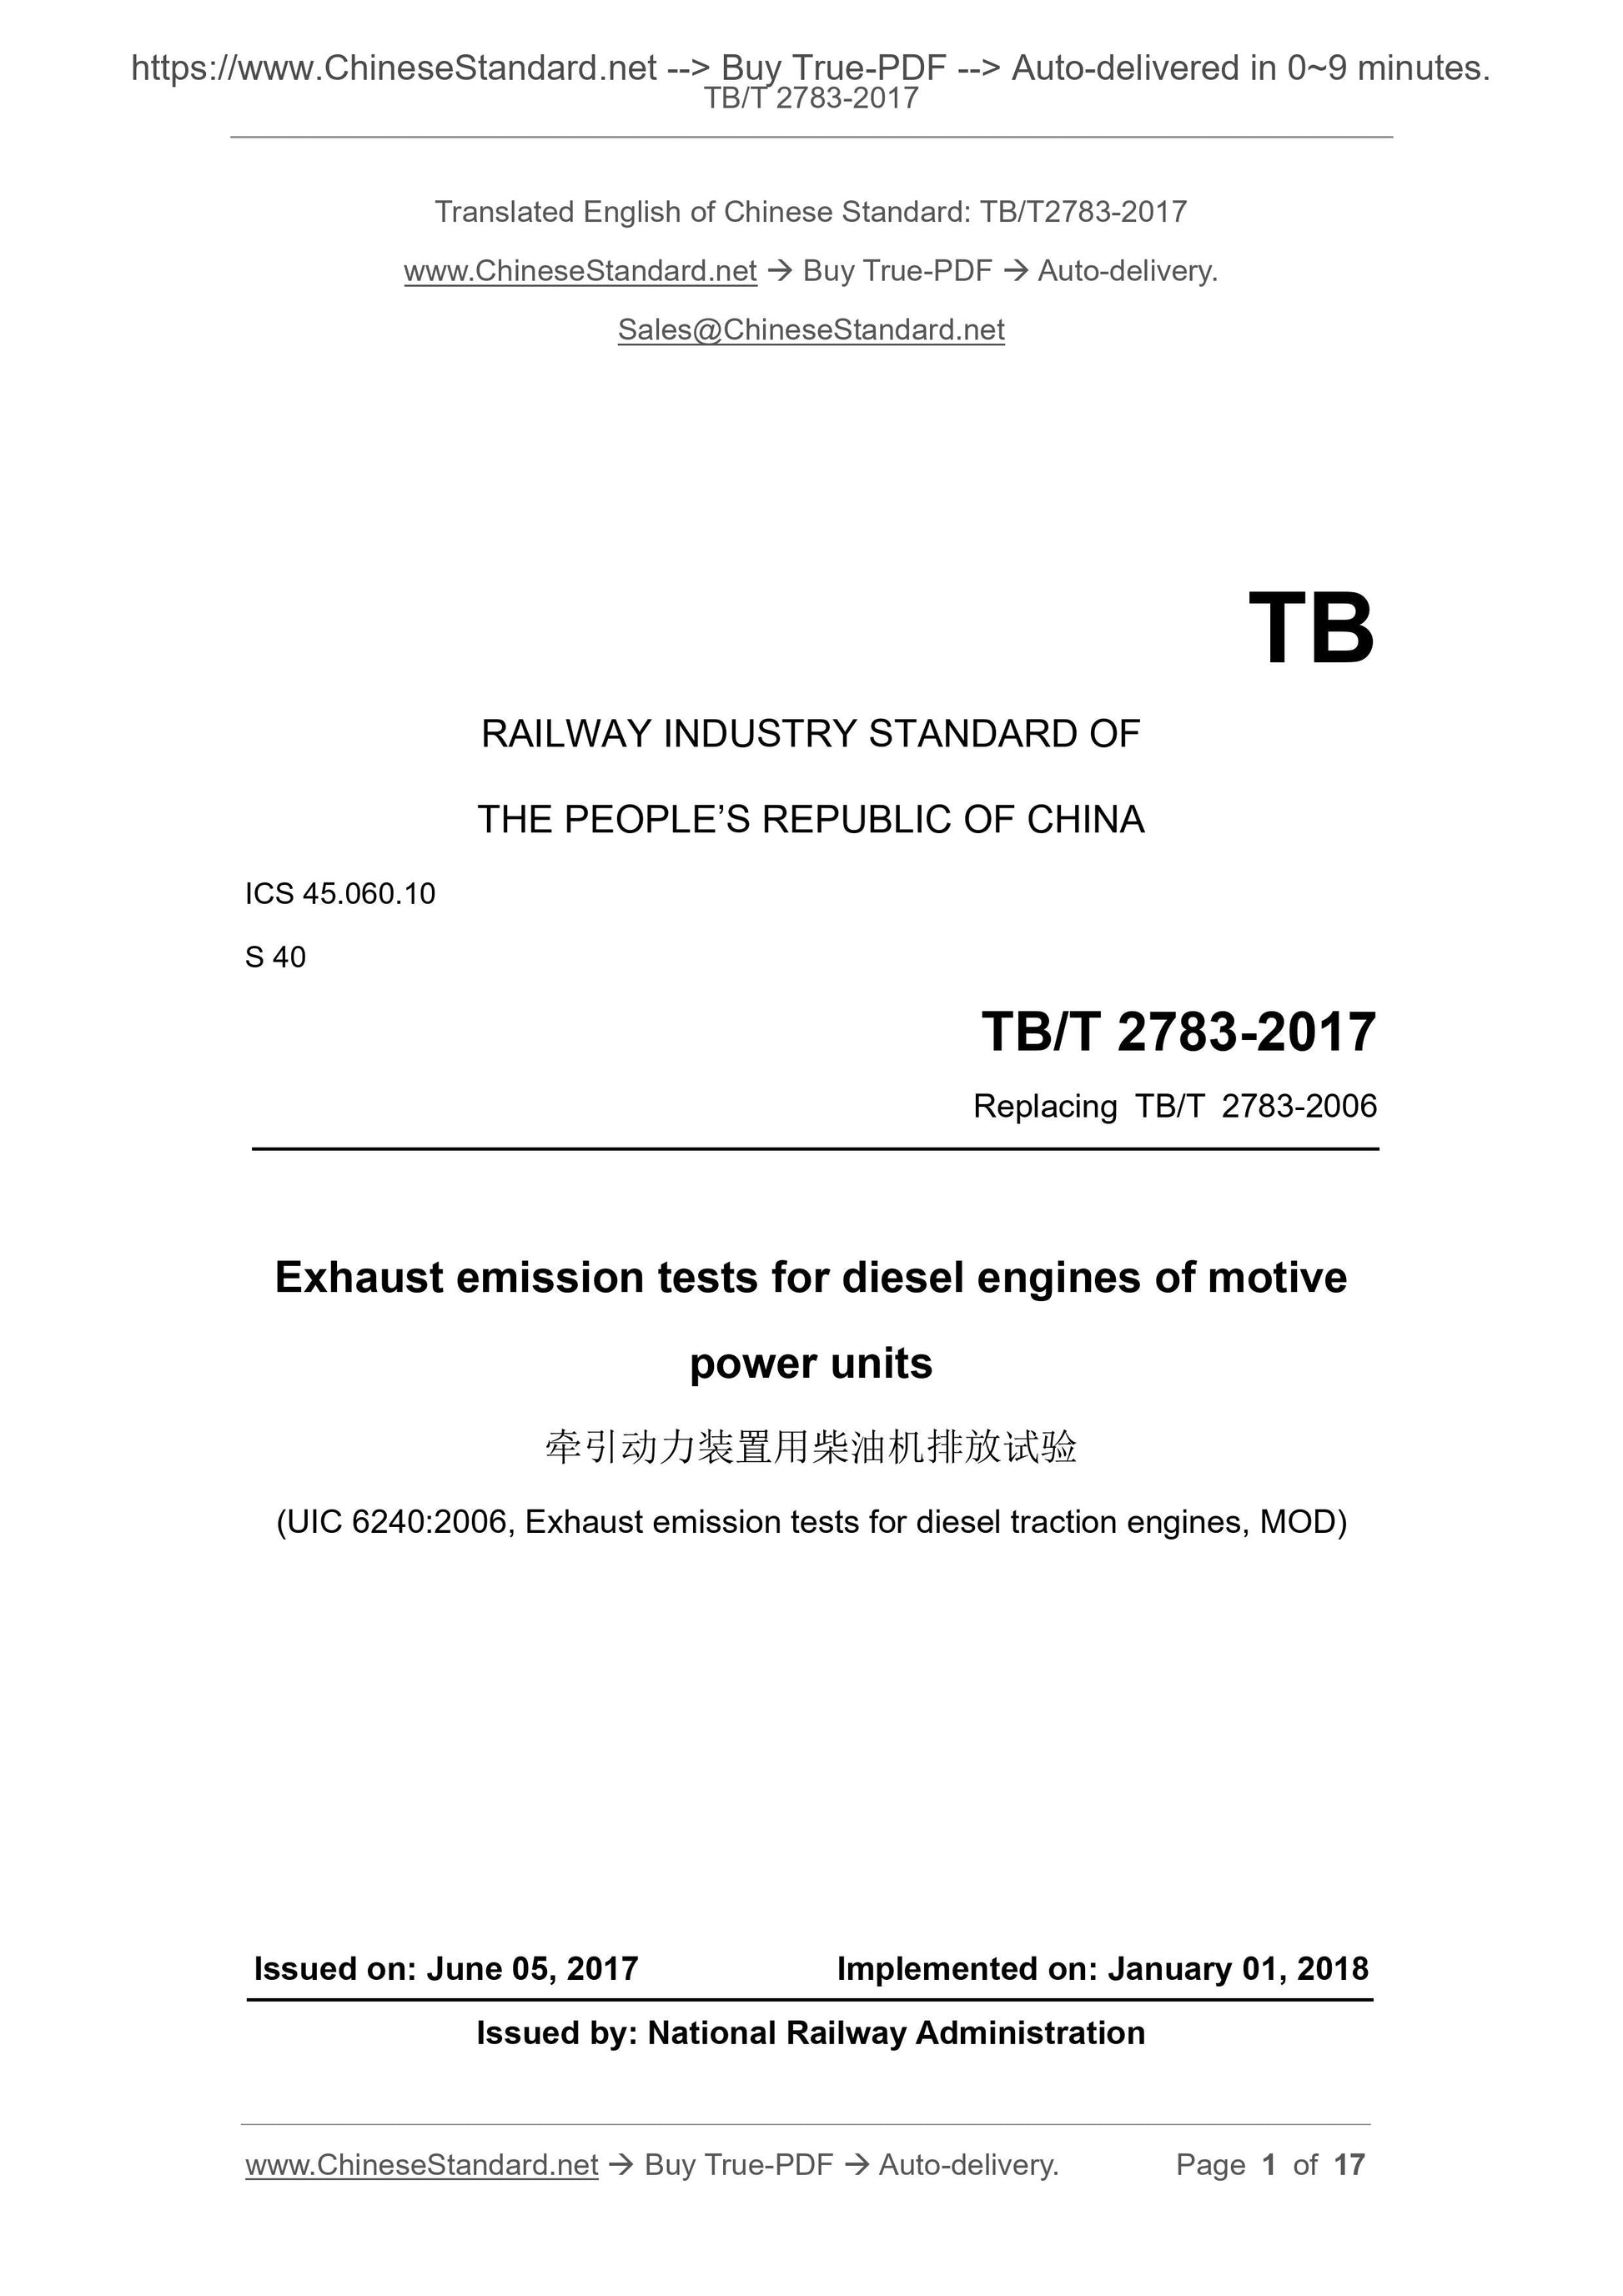 TB/T 2783-2017 Page 1